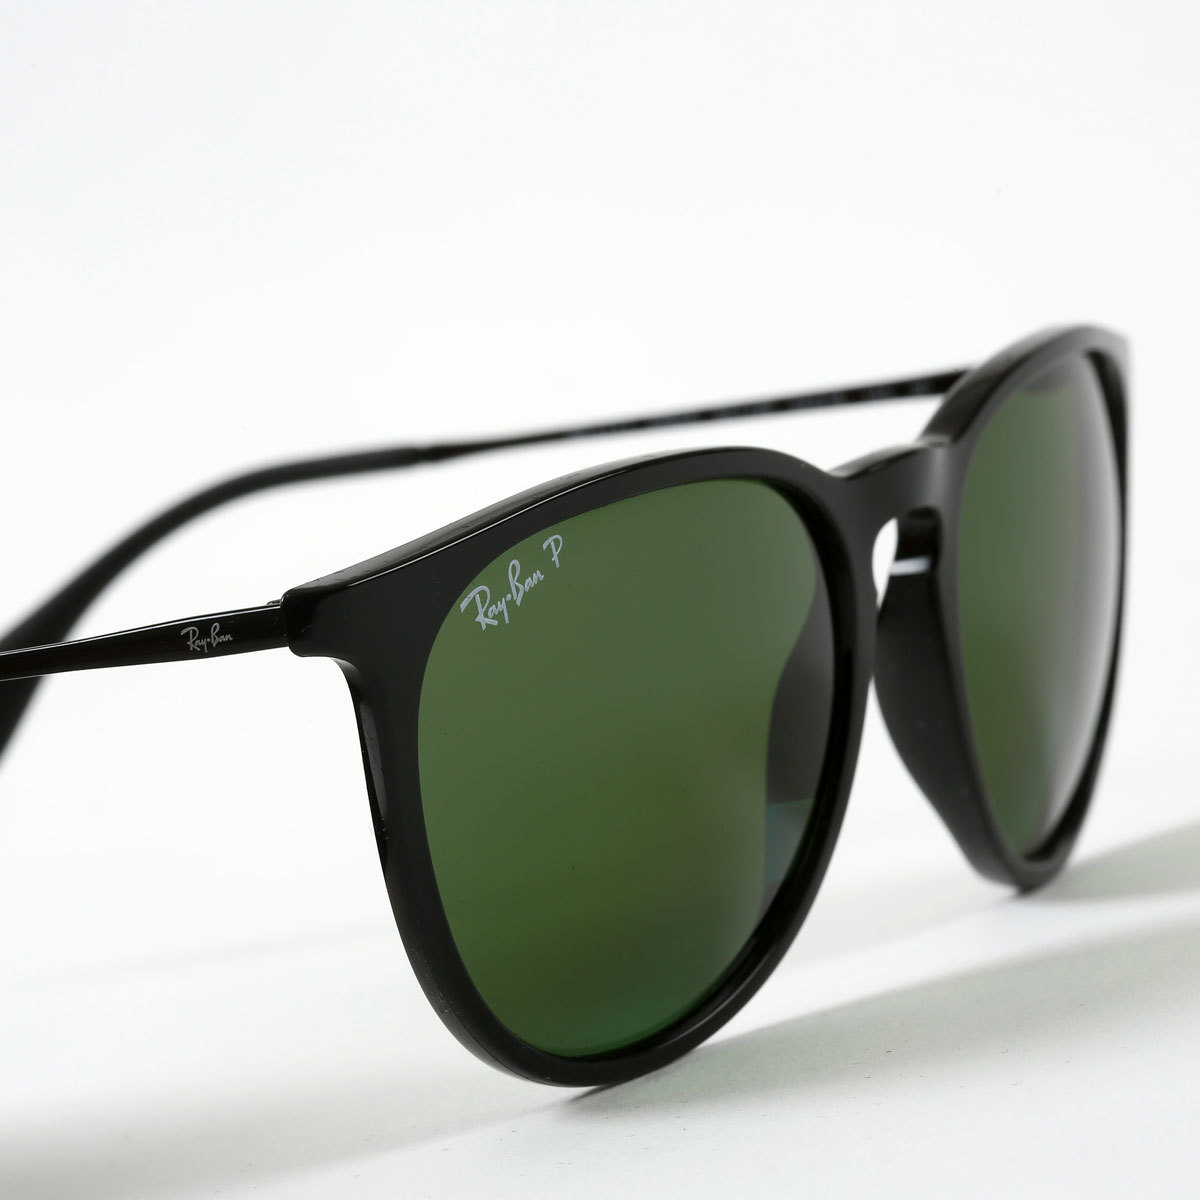 Ray-Ban Erika Black Sunglasses with Green Lenses, RB4171 601/2P